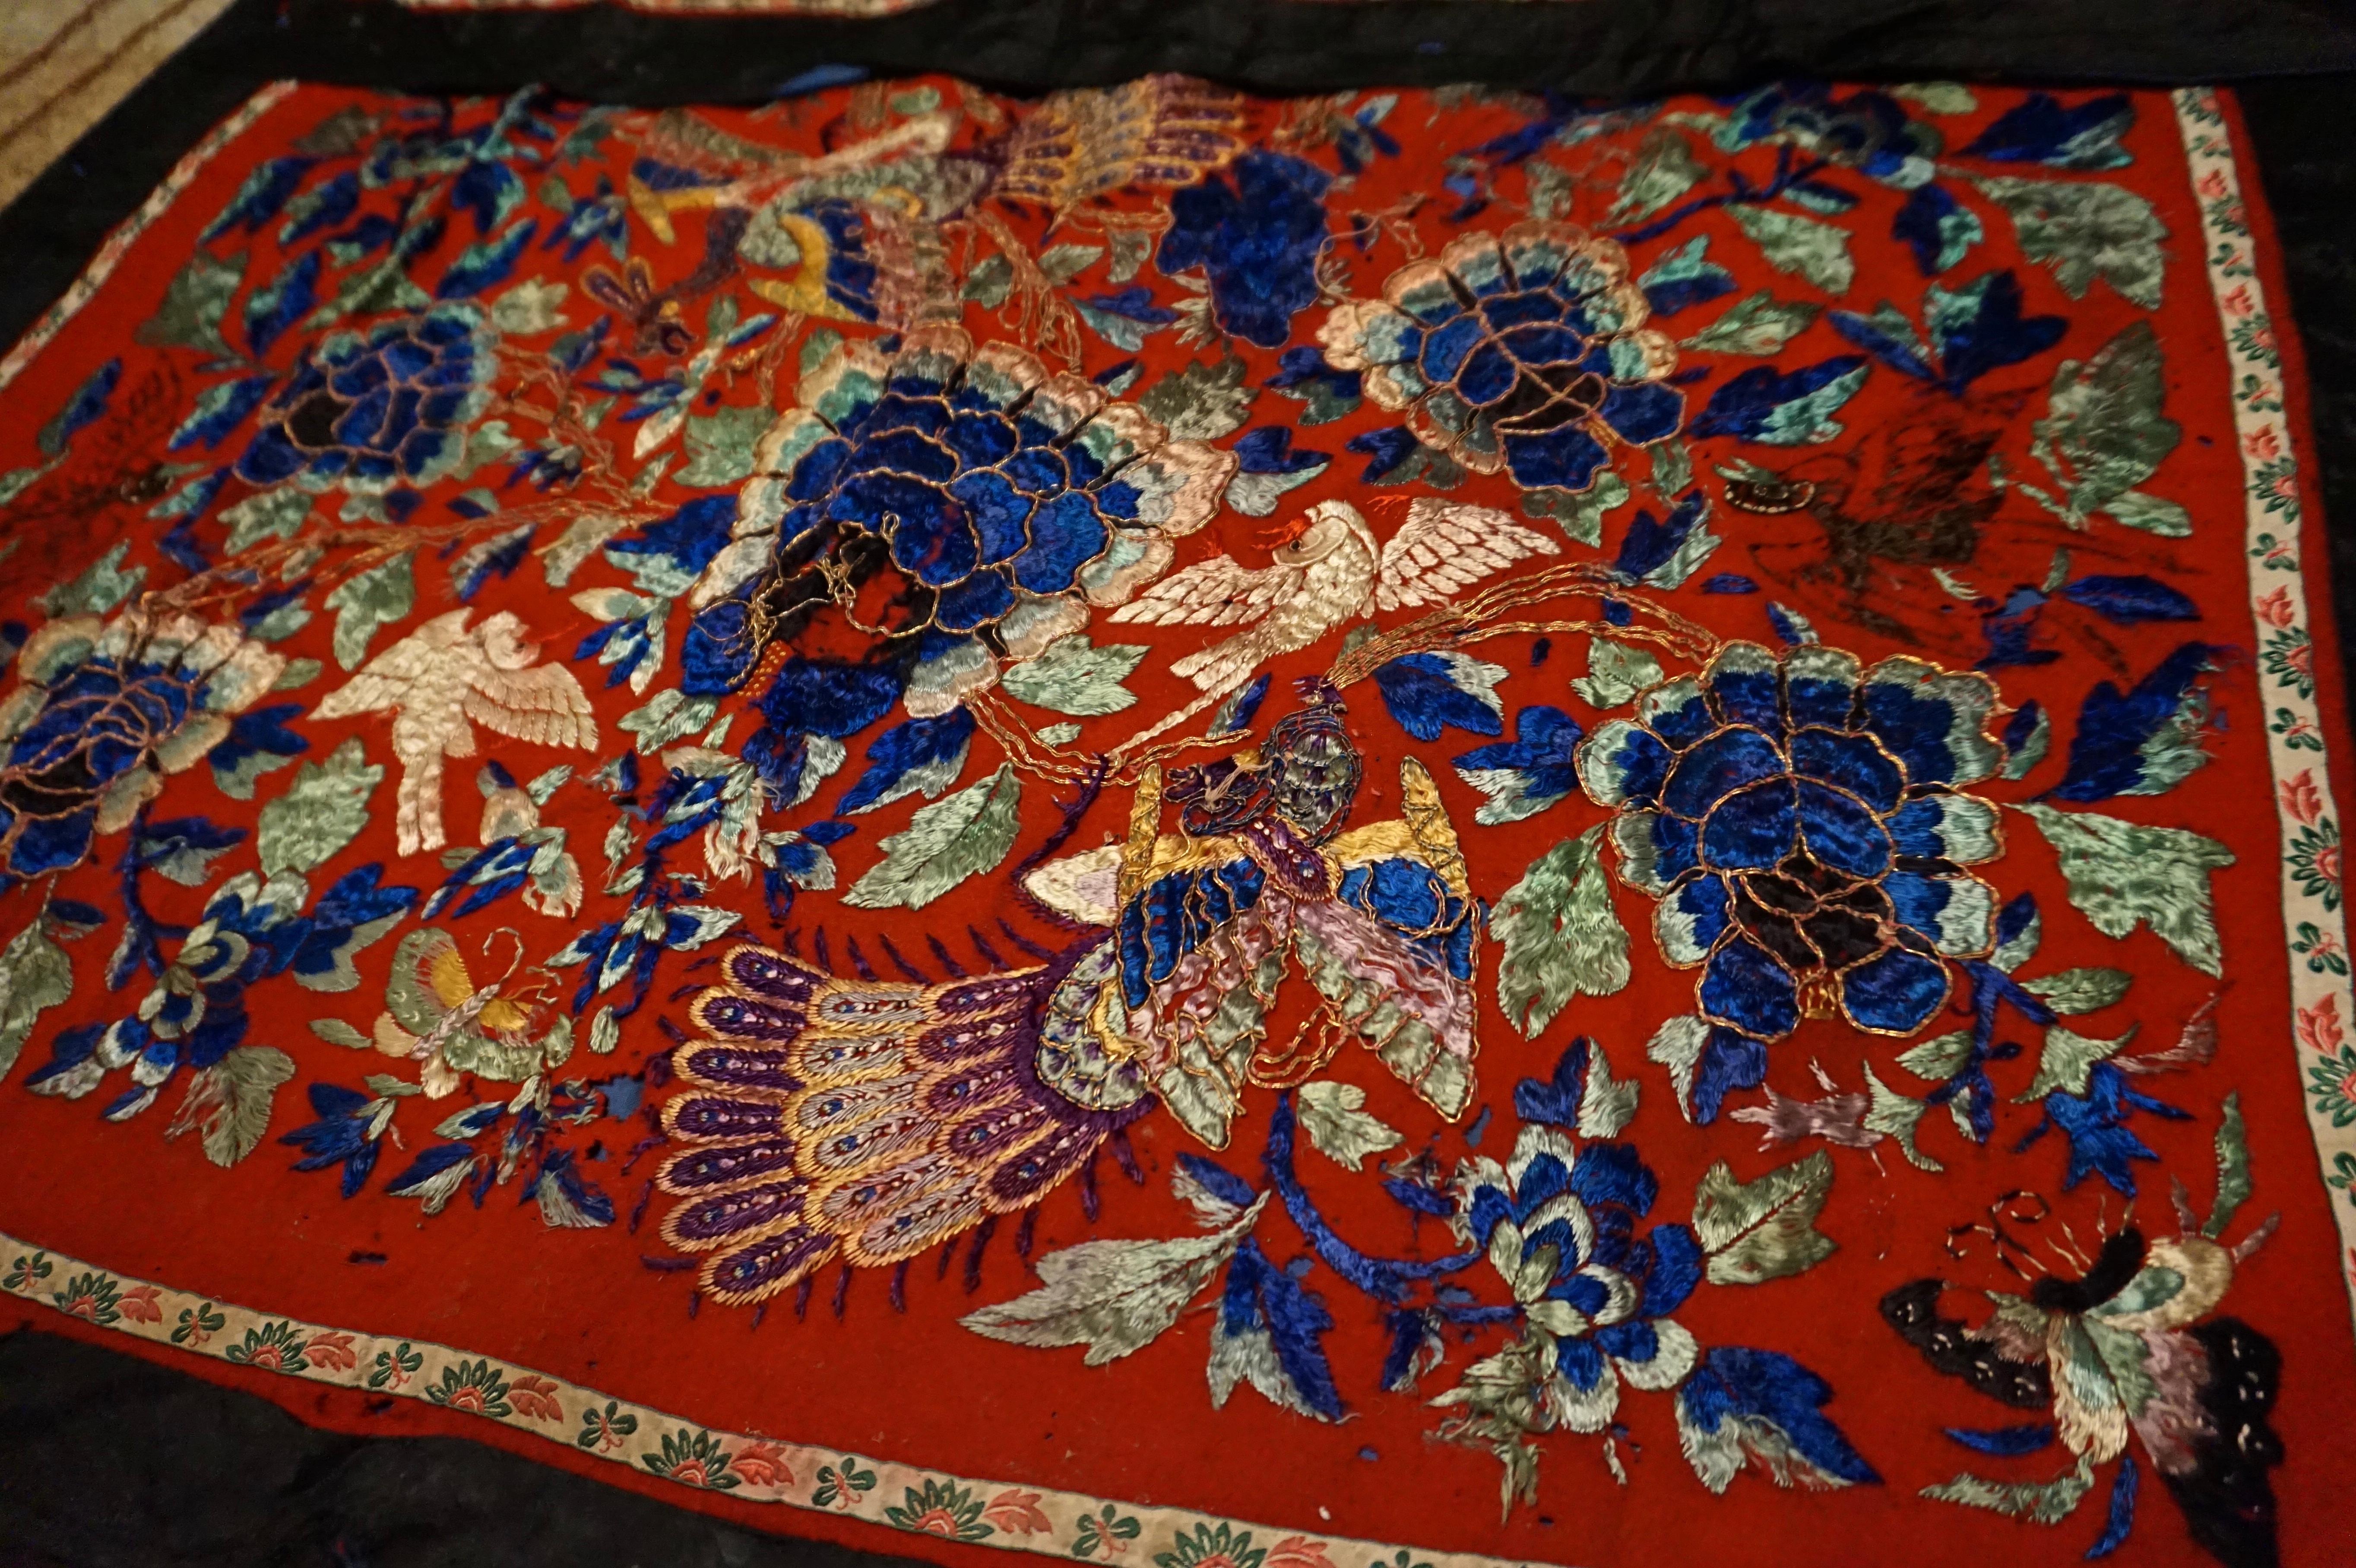 19th Century Chinese Qing Dynasty Silk Embroidery Altar Banner In Good Condition For Sale In Vancouver, British Columbia